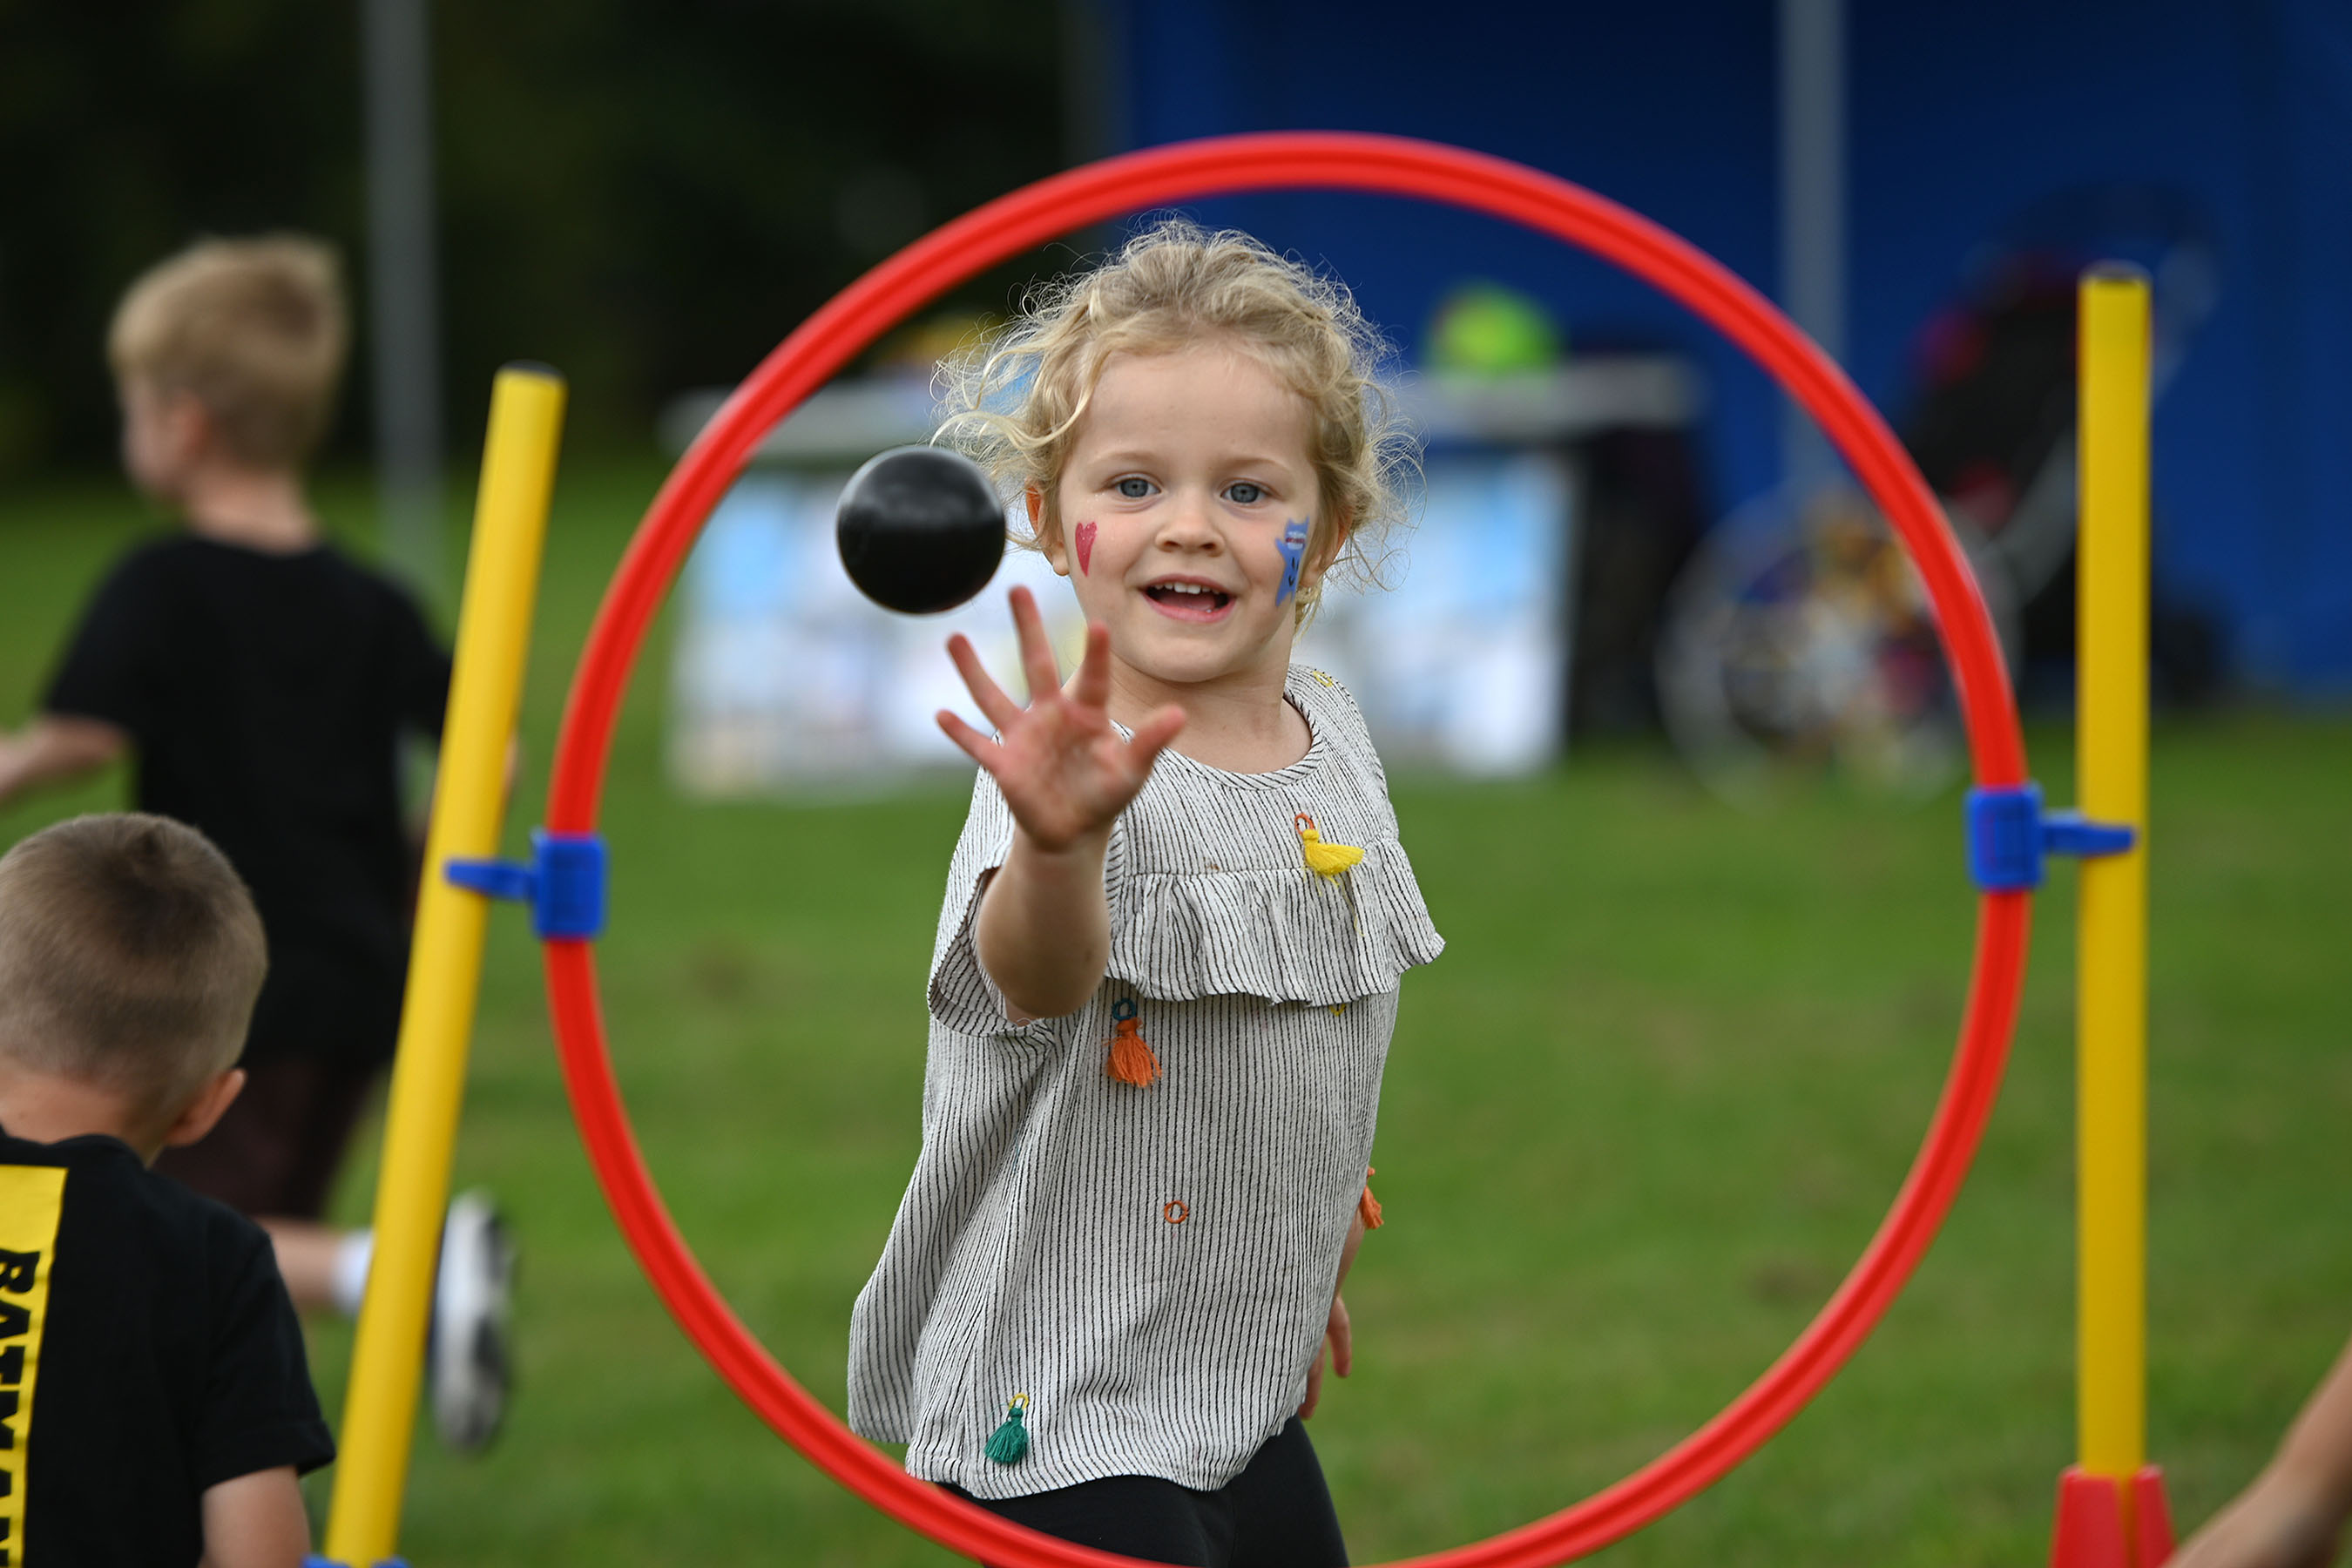 A photo of a youngster enjoying the community games.